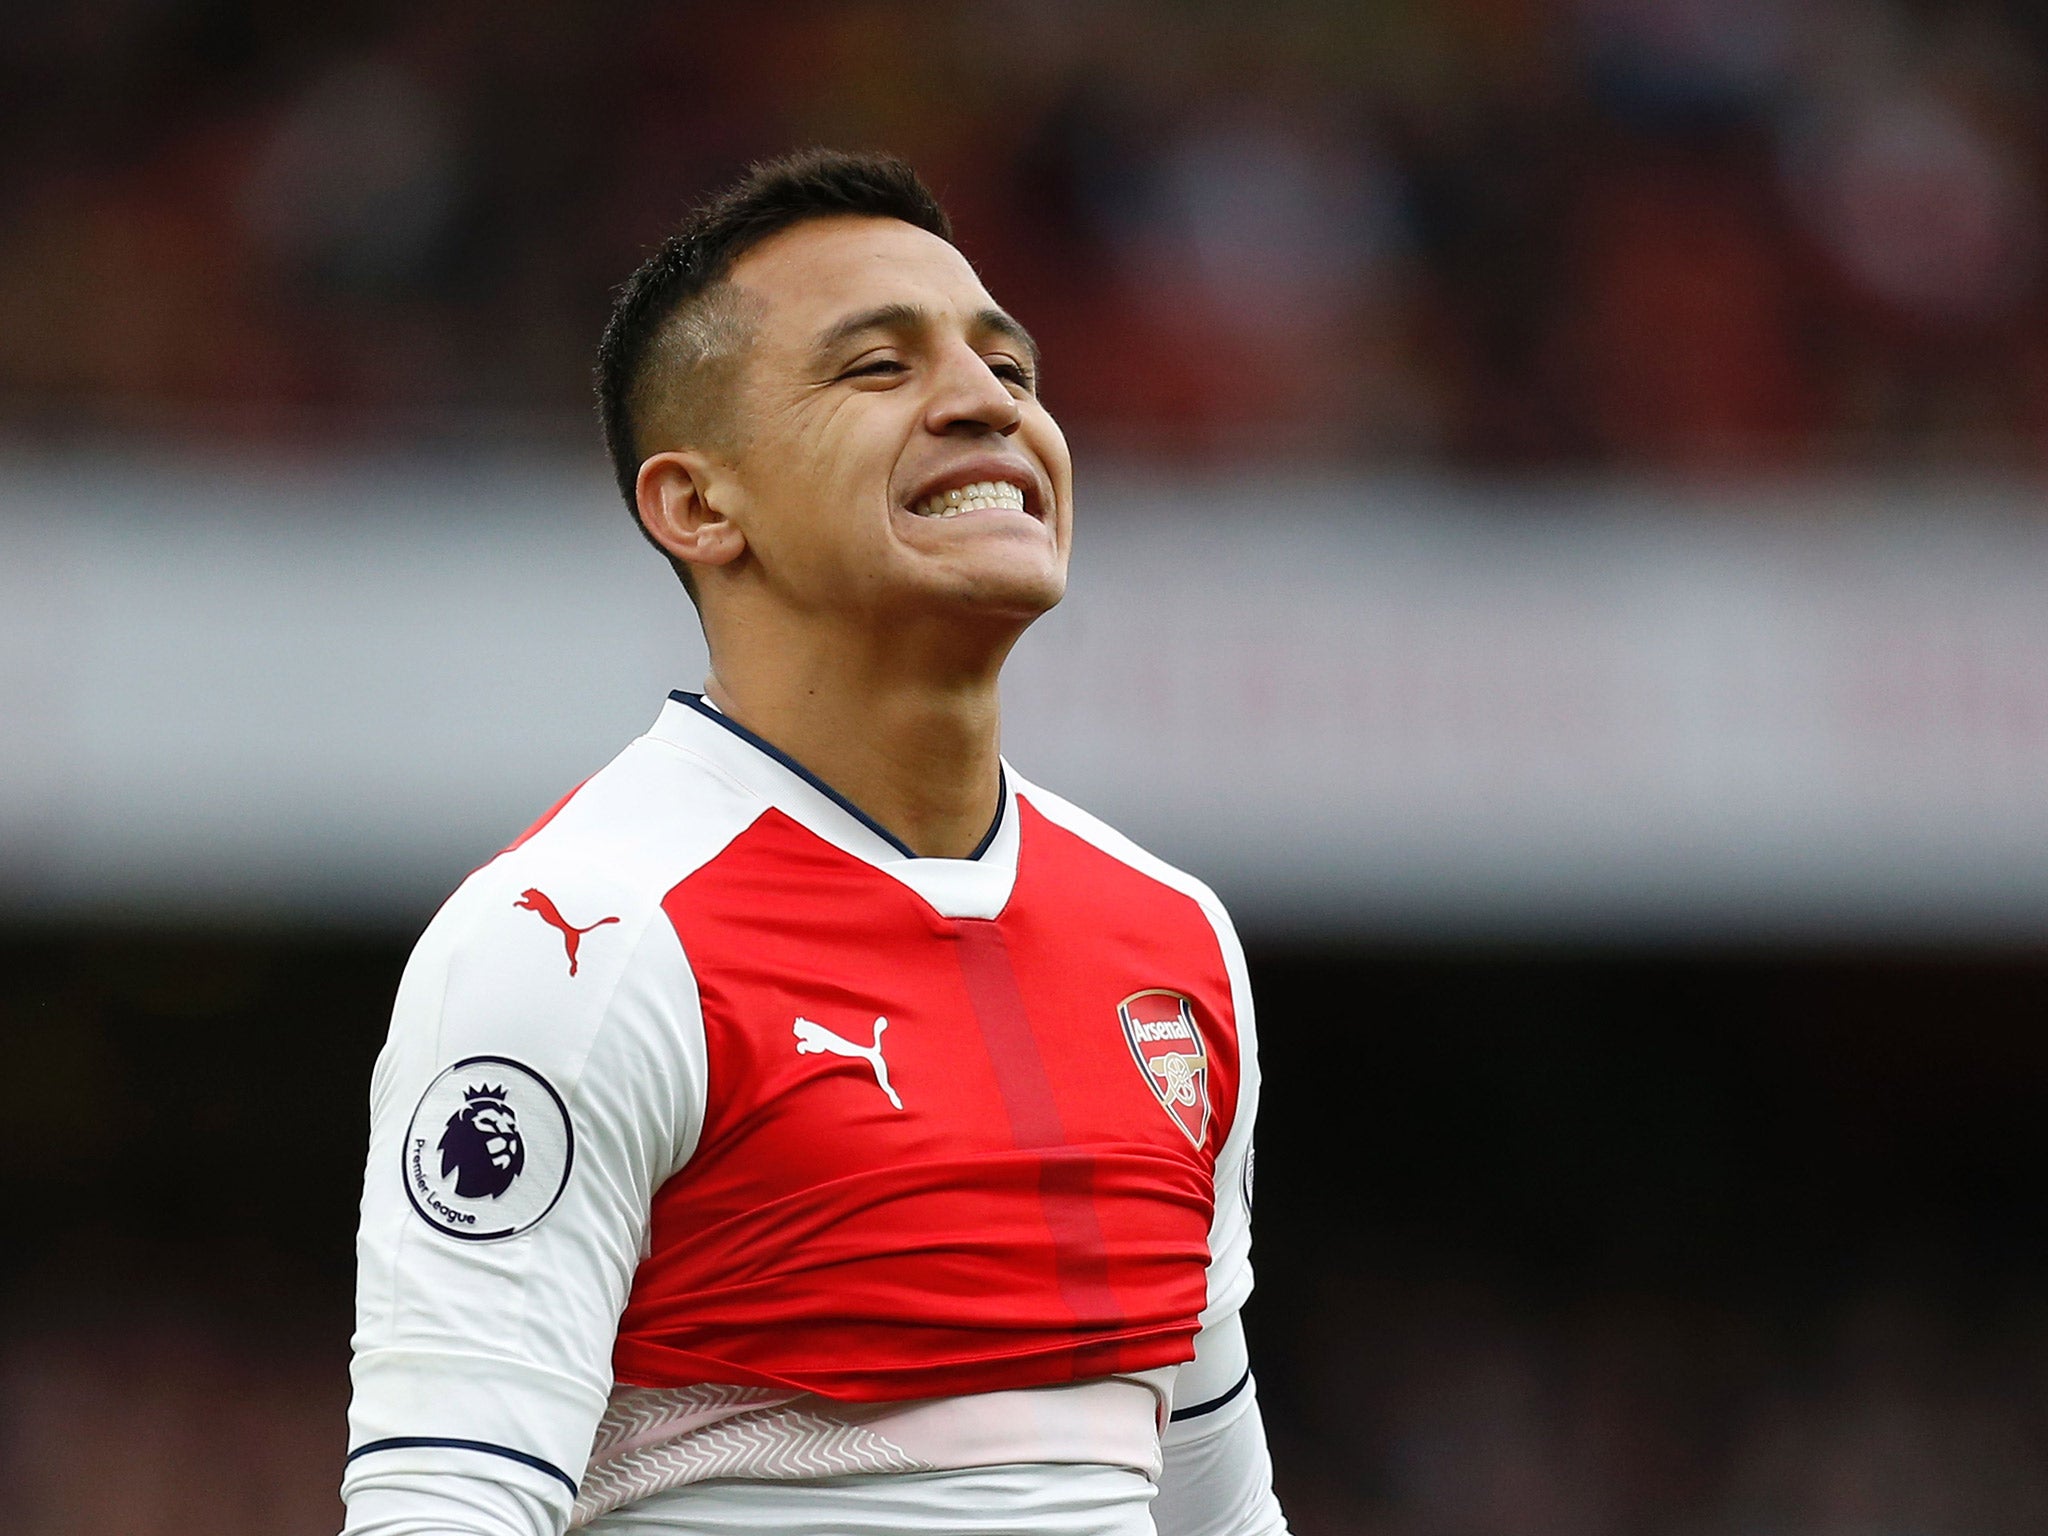 Alexis Sanchez reacts after missing a chance for Arsenal